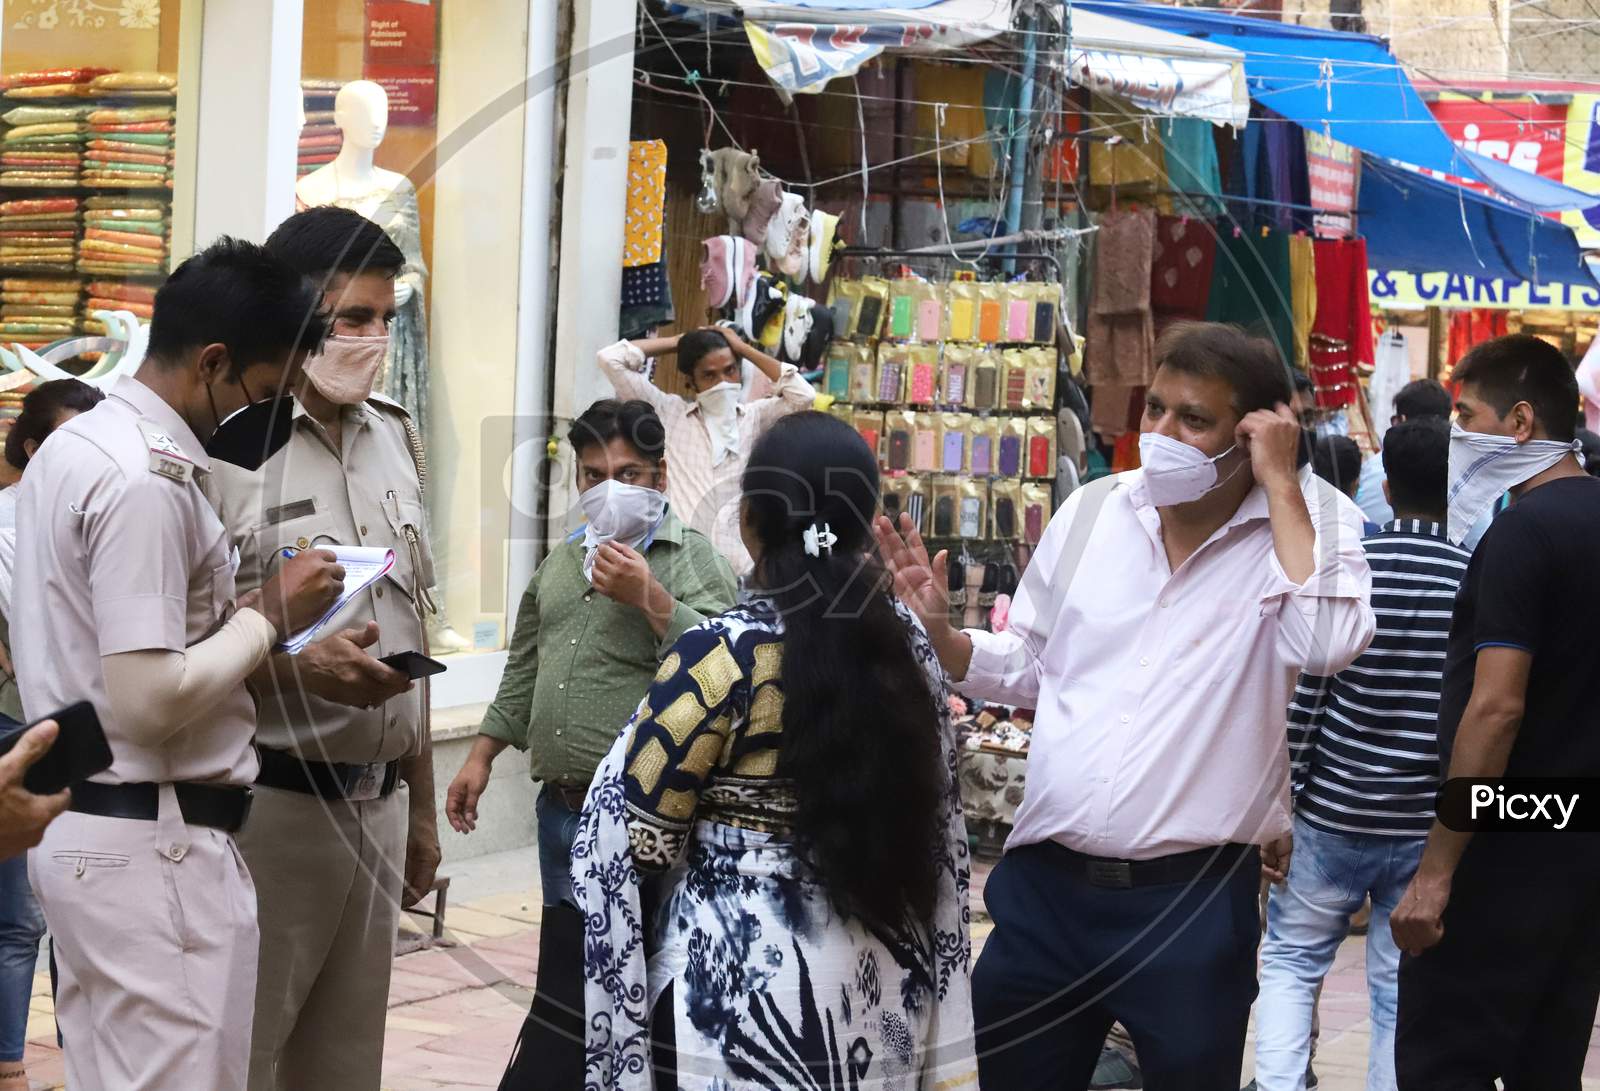 Delhi Police fine people for violating the measures for not wearing face masks, at Lajpat Nagar market, On June 20, 2020 In New Delhi, India.